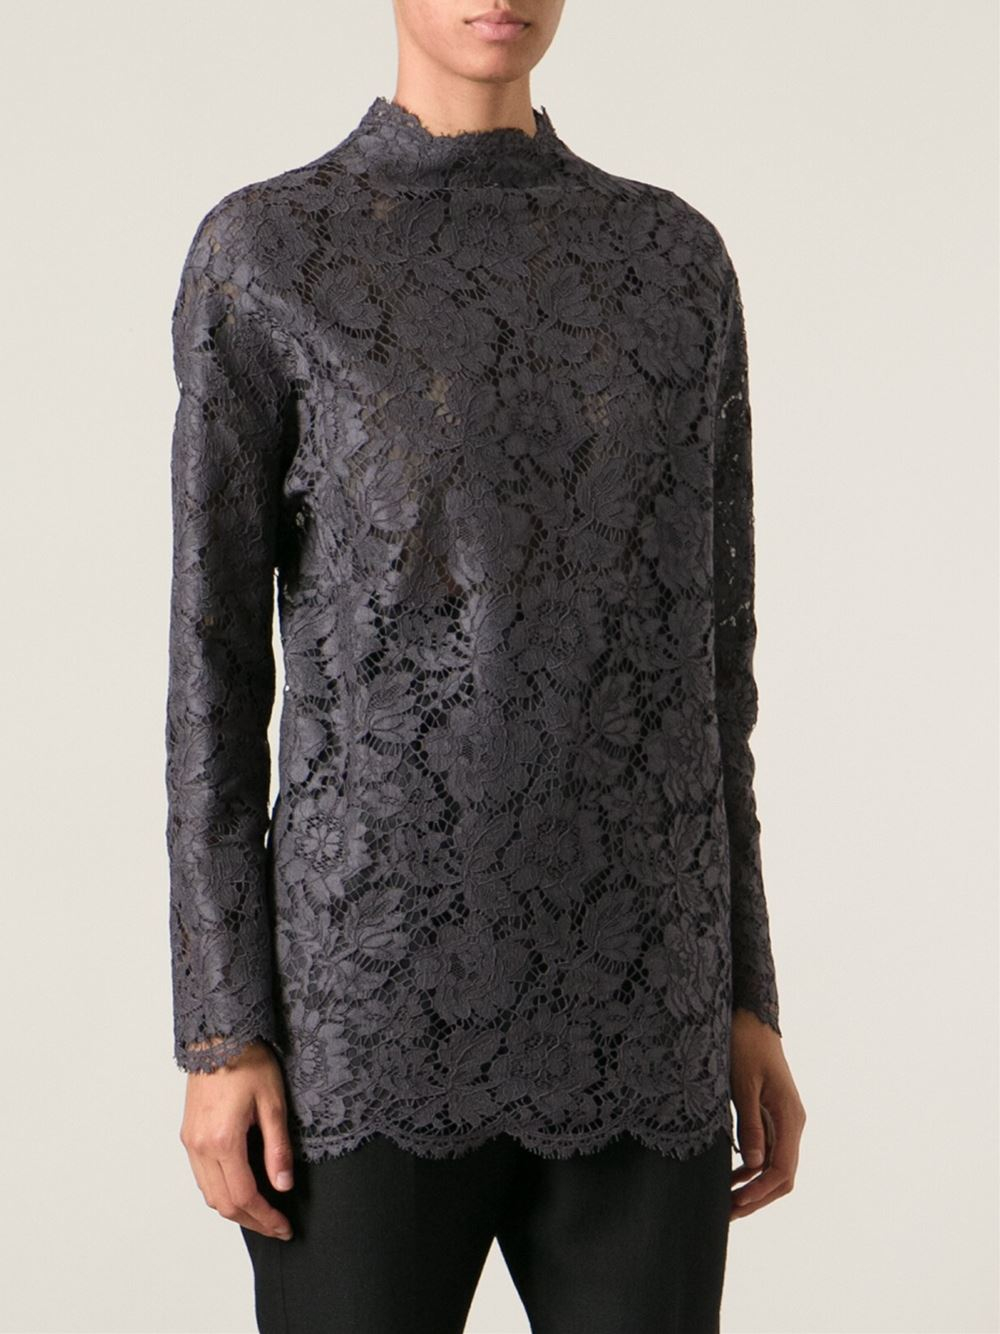 Lyst - Valentino Lace Blouse in Gray